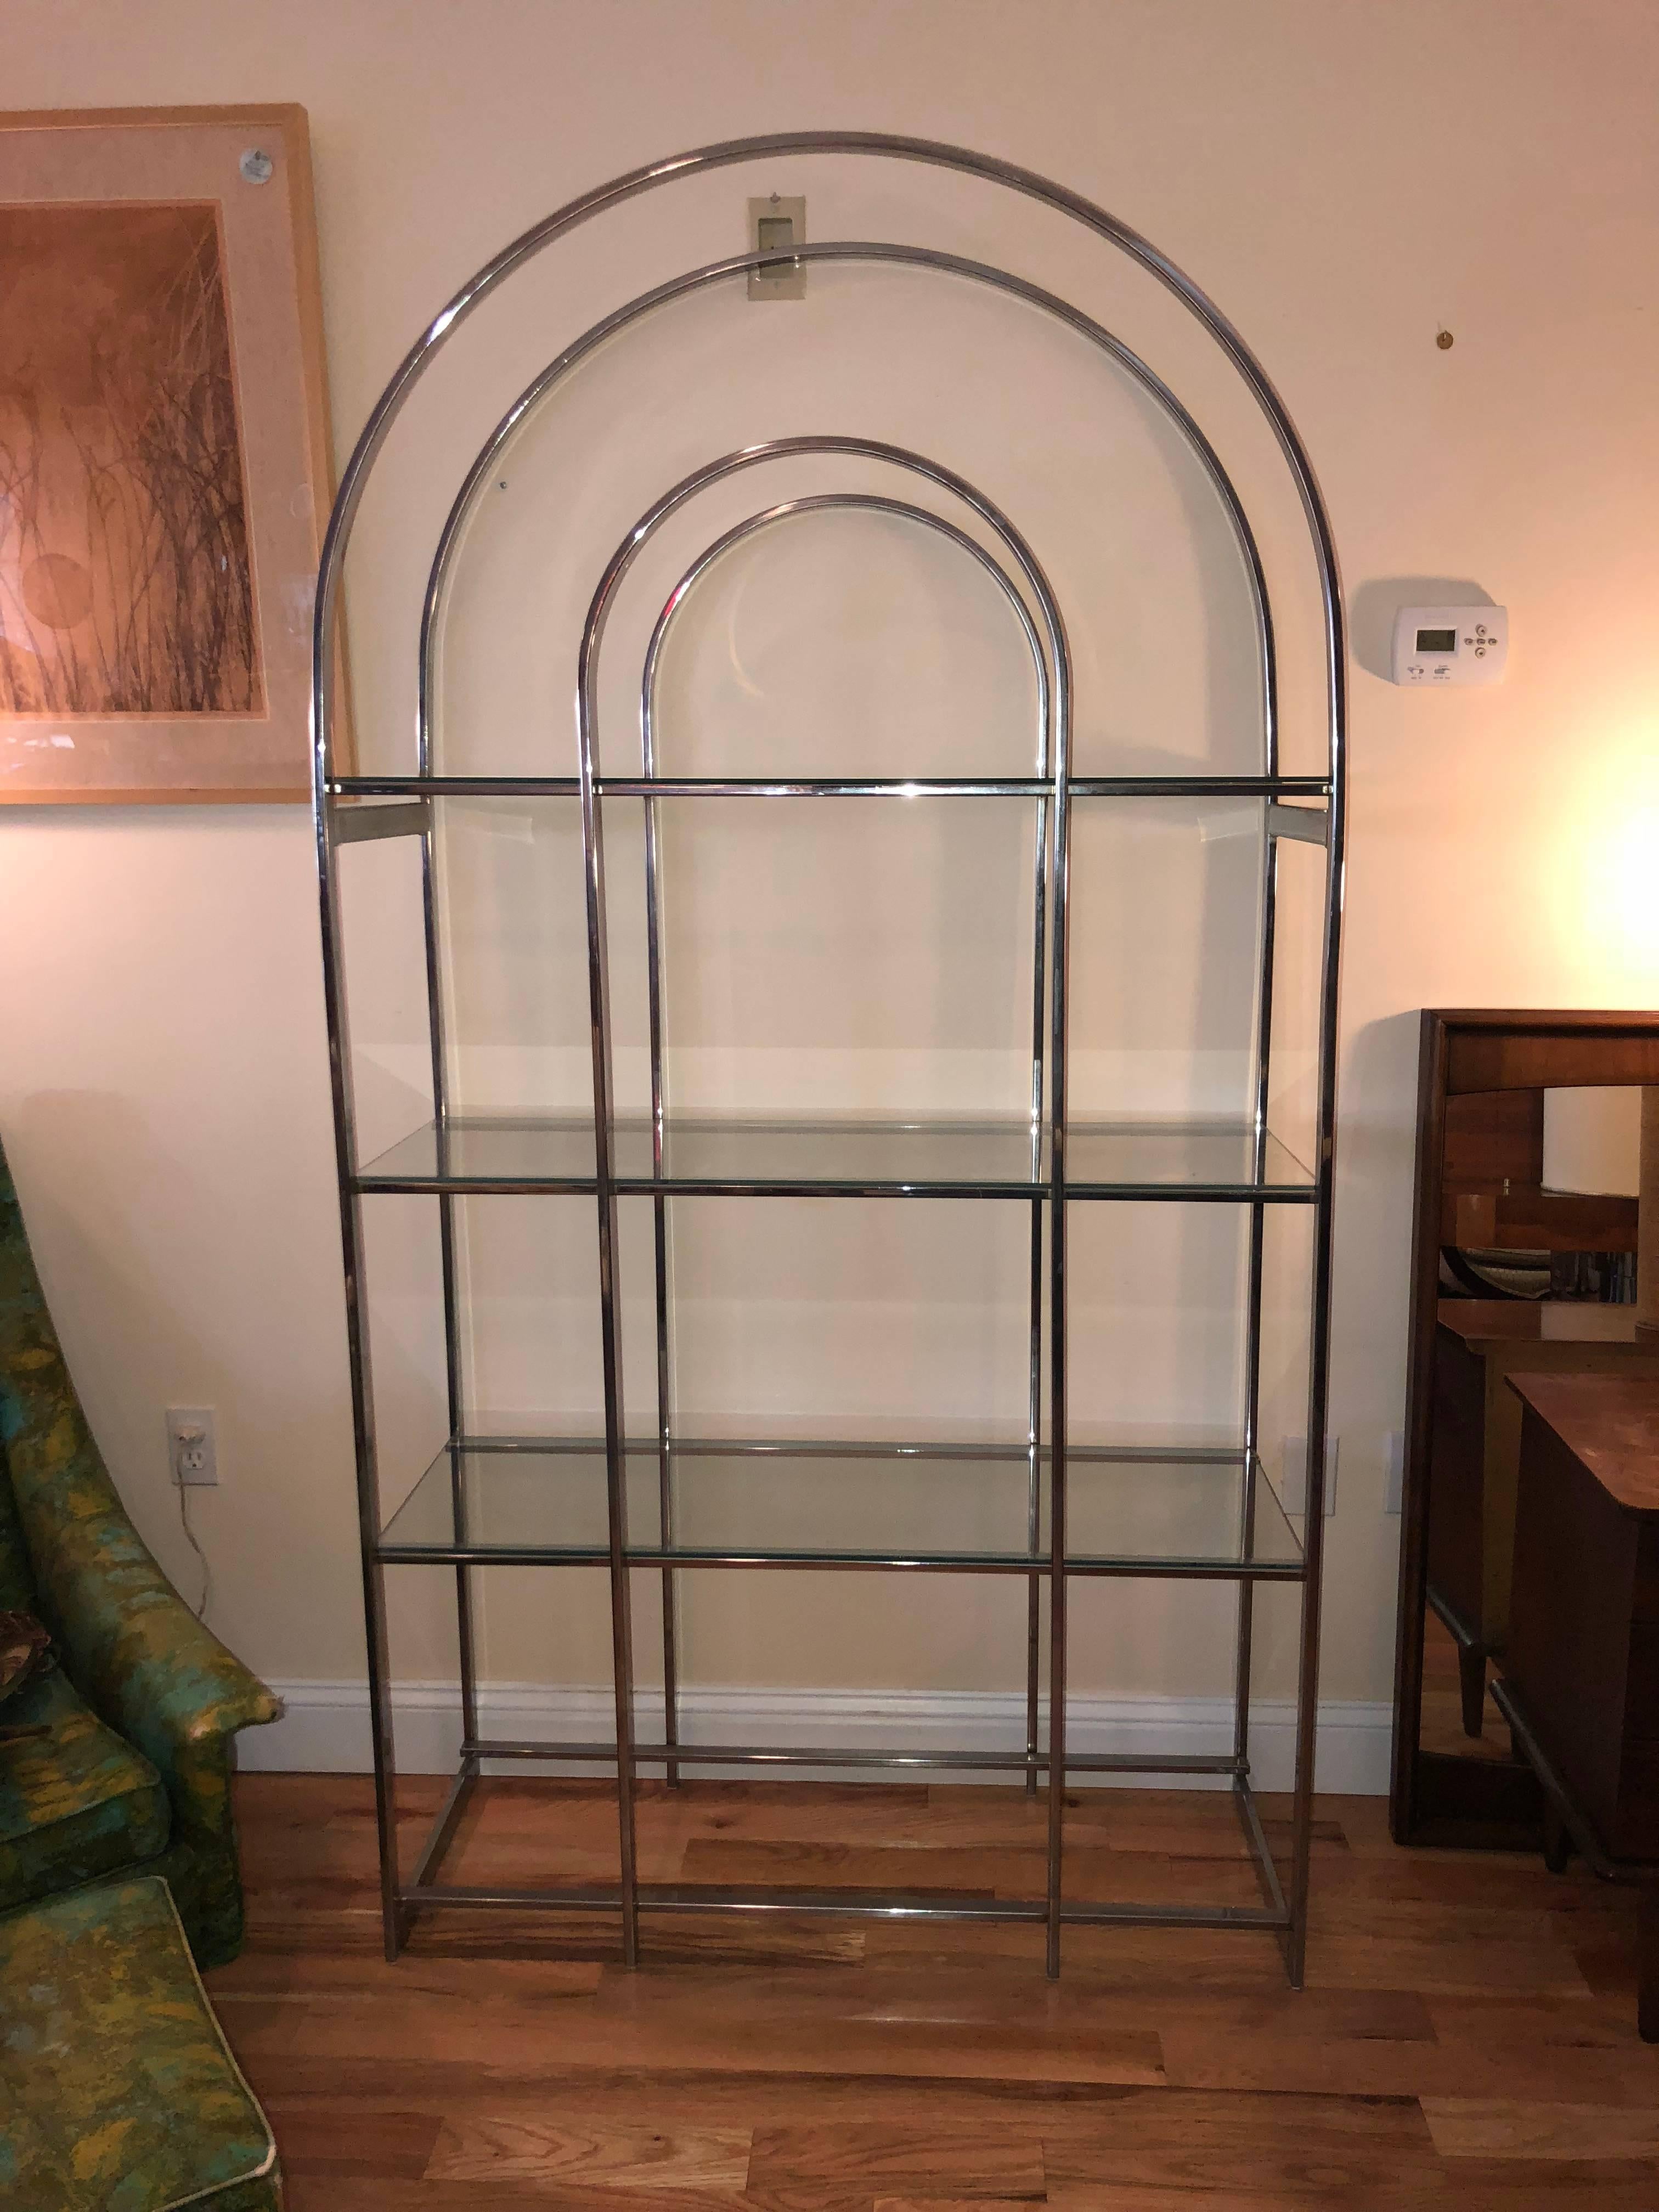 Milo Baughman style chrome étagère with four glass shelves. Great for display piece for living room, office or bedroom. Domed open top makes this very light and airy. Bottom glass shelf is missing in photo but being cut as we list this.